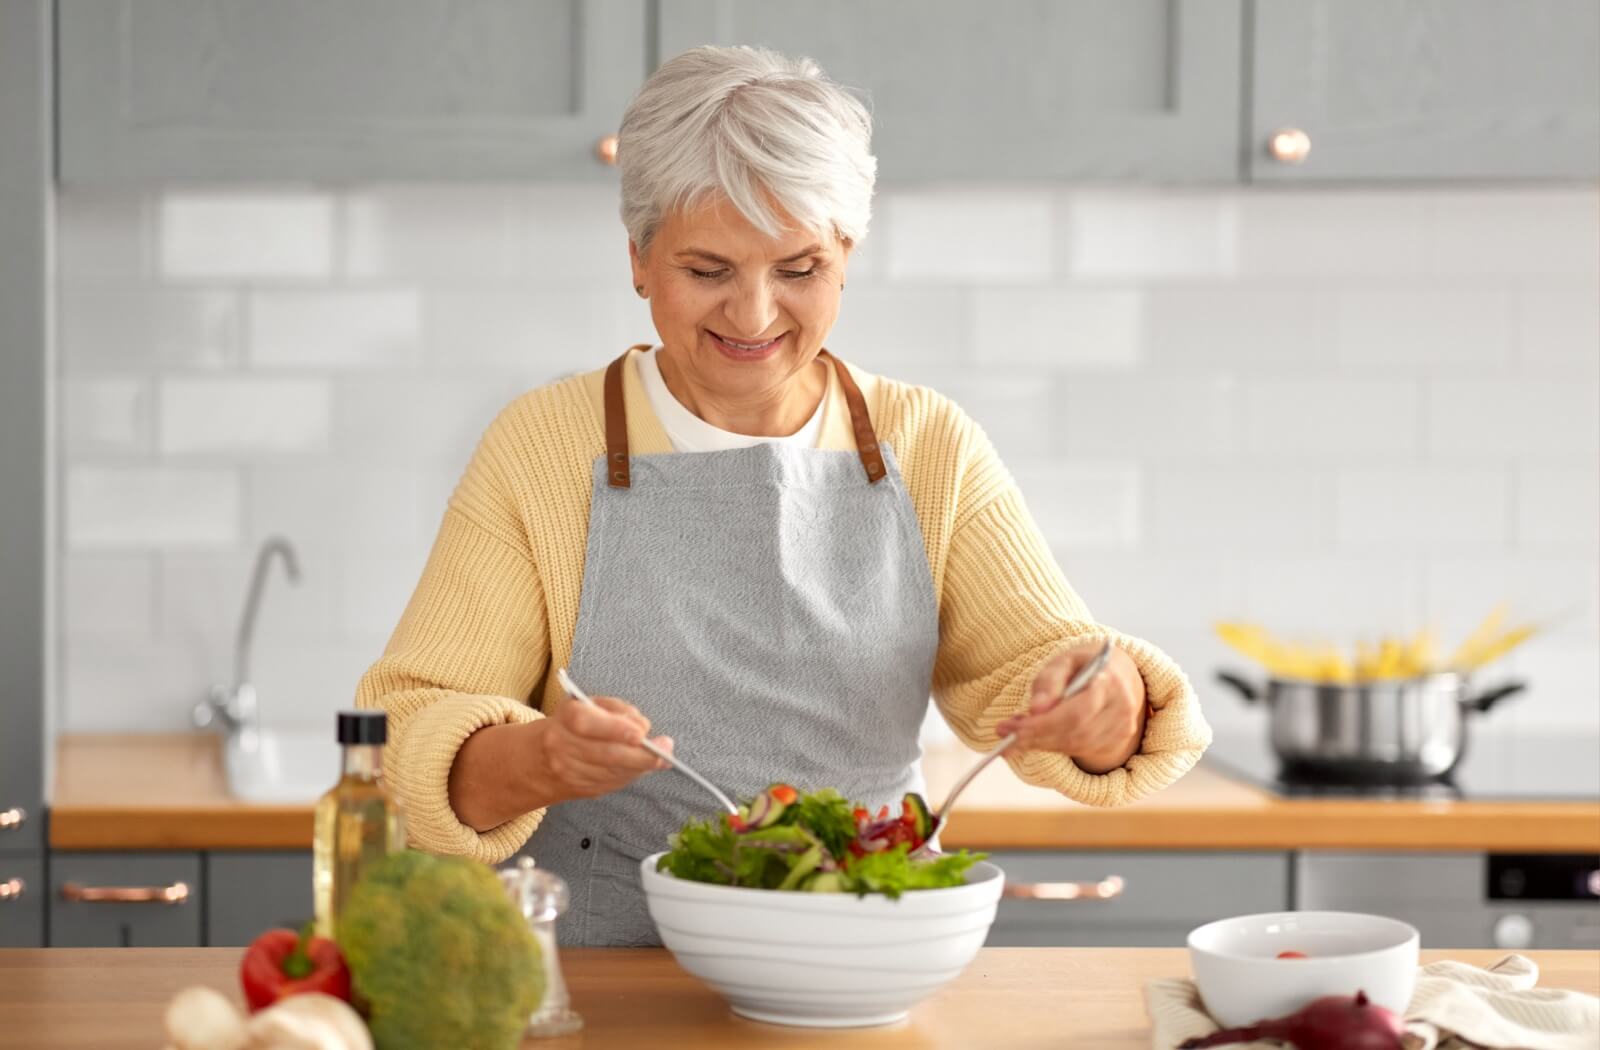 An older adult woman in a kitchen making a bowl of salad with both hands and smiling